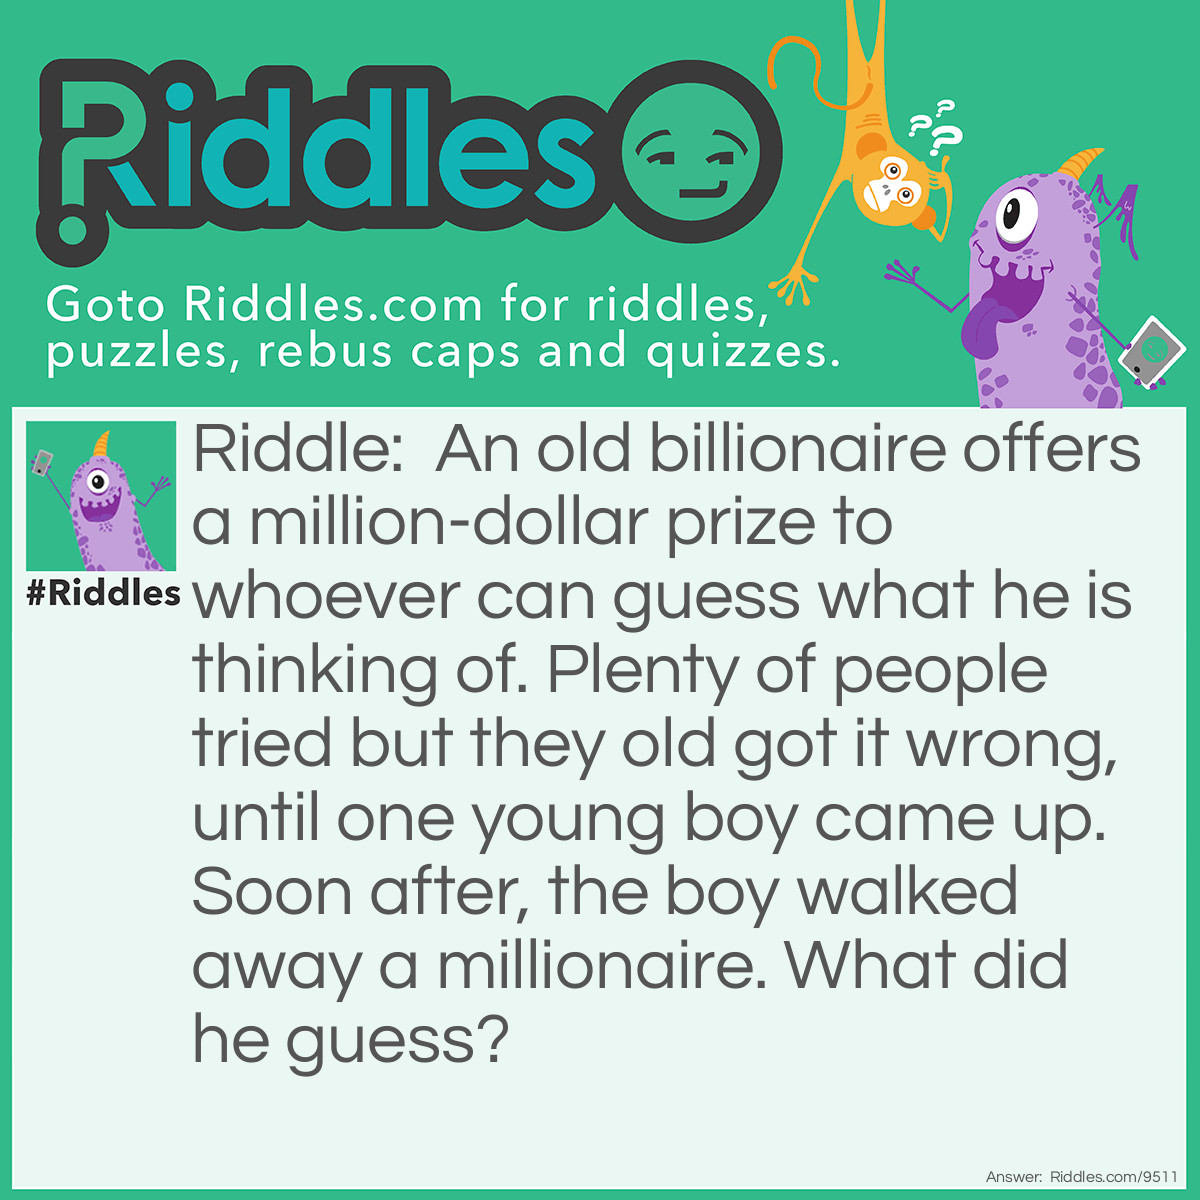 Riddle: An old billionaire offers a million-dollar prize to whoever can guess what he is thinking of. Plenty of people tried but they old got it wrong, until one young boy came up. Soon after, the boy walked away a millionaire. What did he guess? Answer: The boy said, "You are thinking of something you thought I wouldn't guess". The boy was right by technicality.